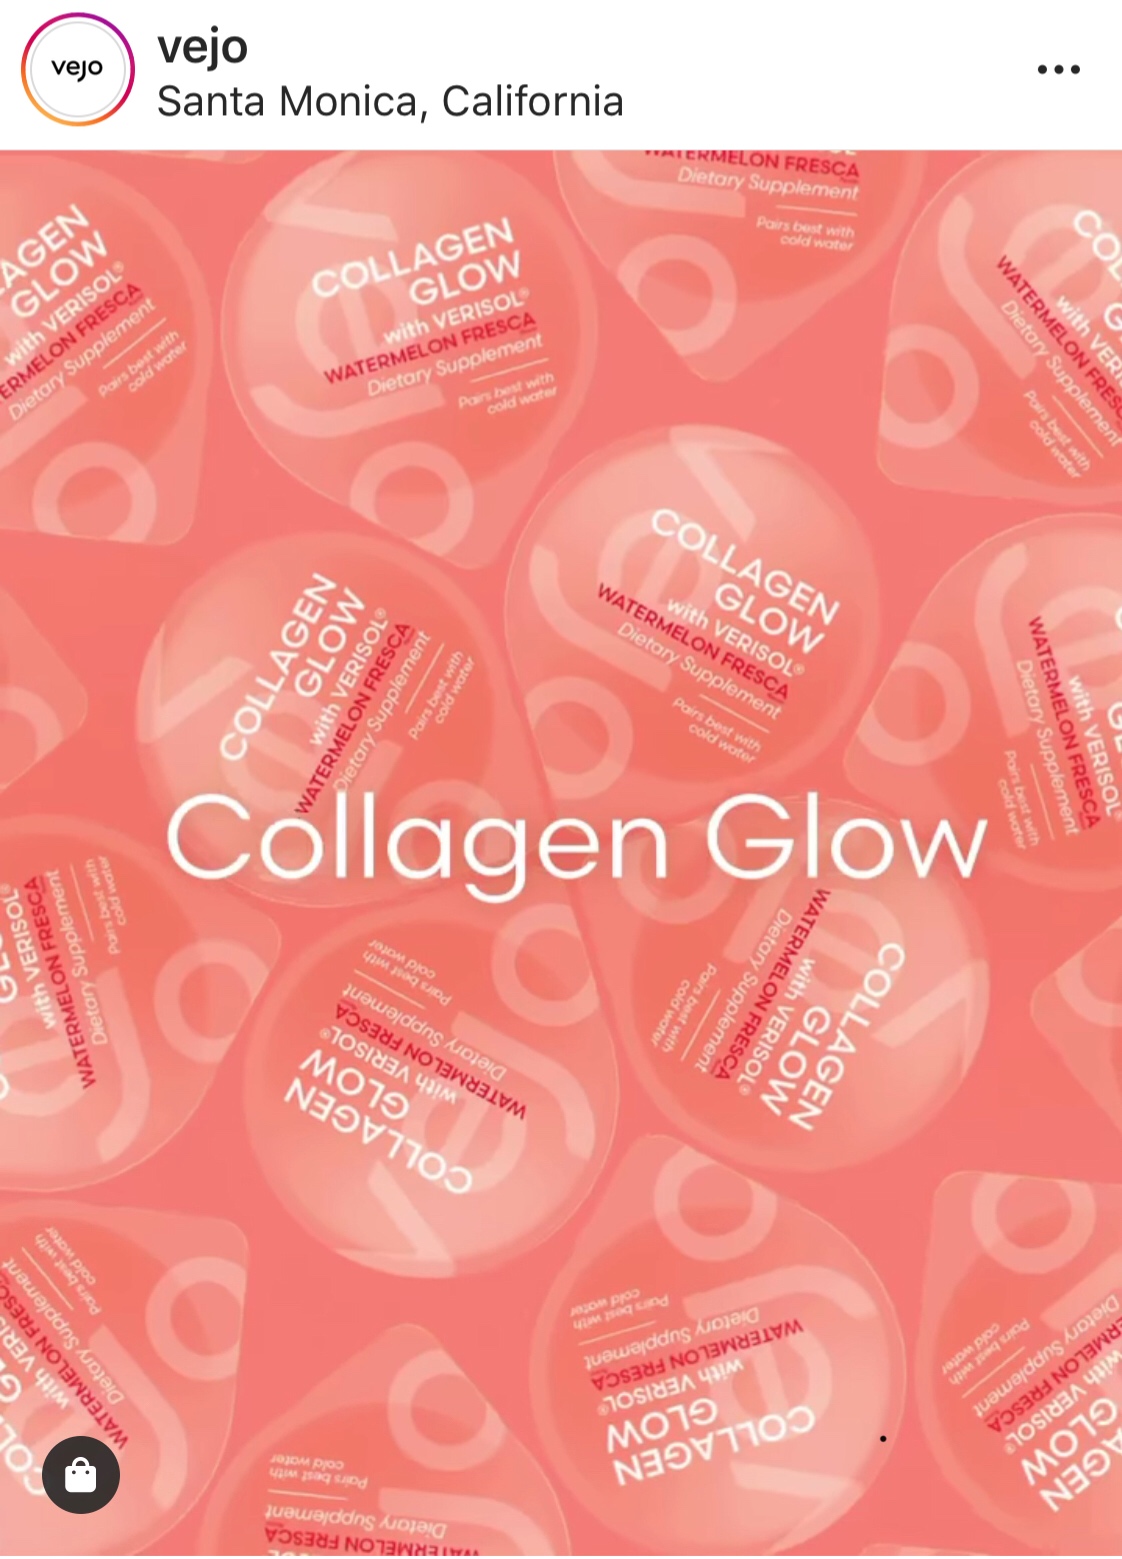 Vejo Collagen Glow on More Than Turquoise  